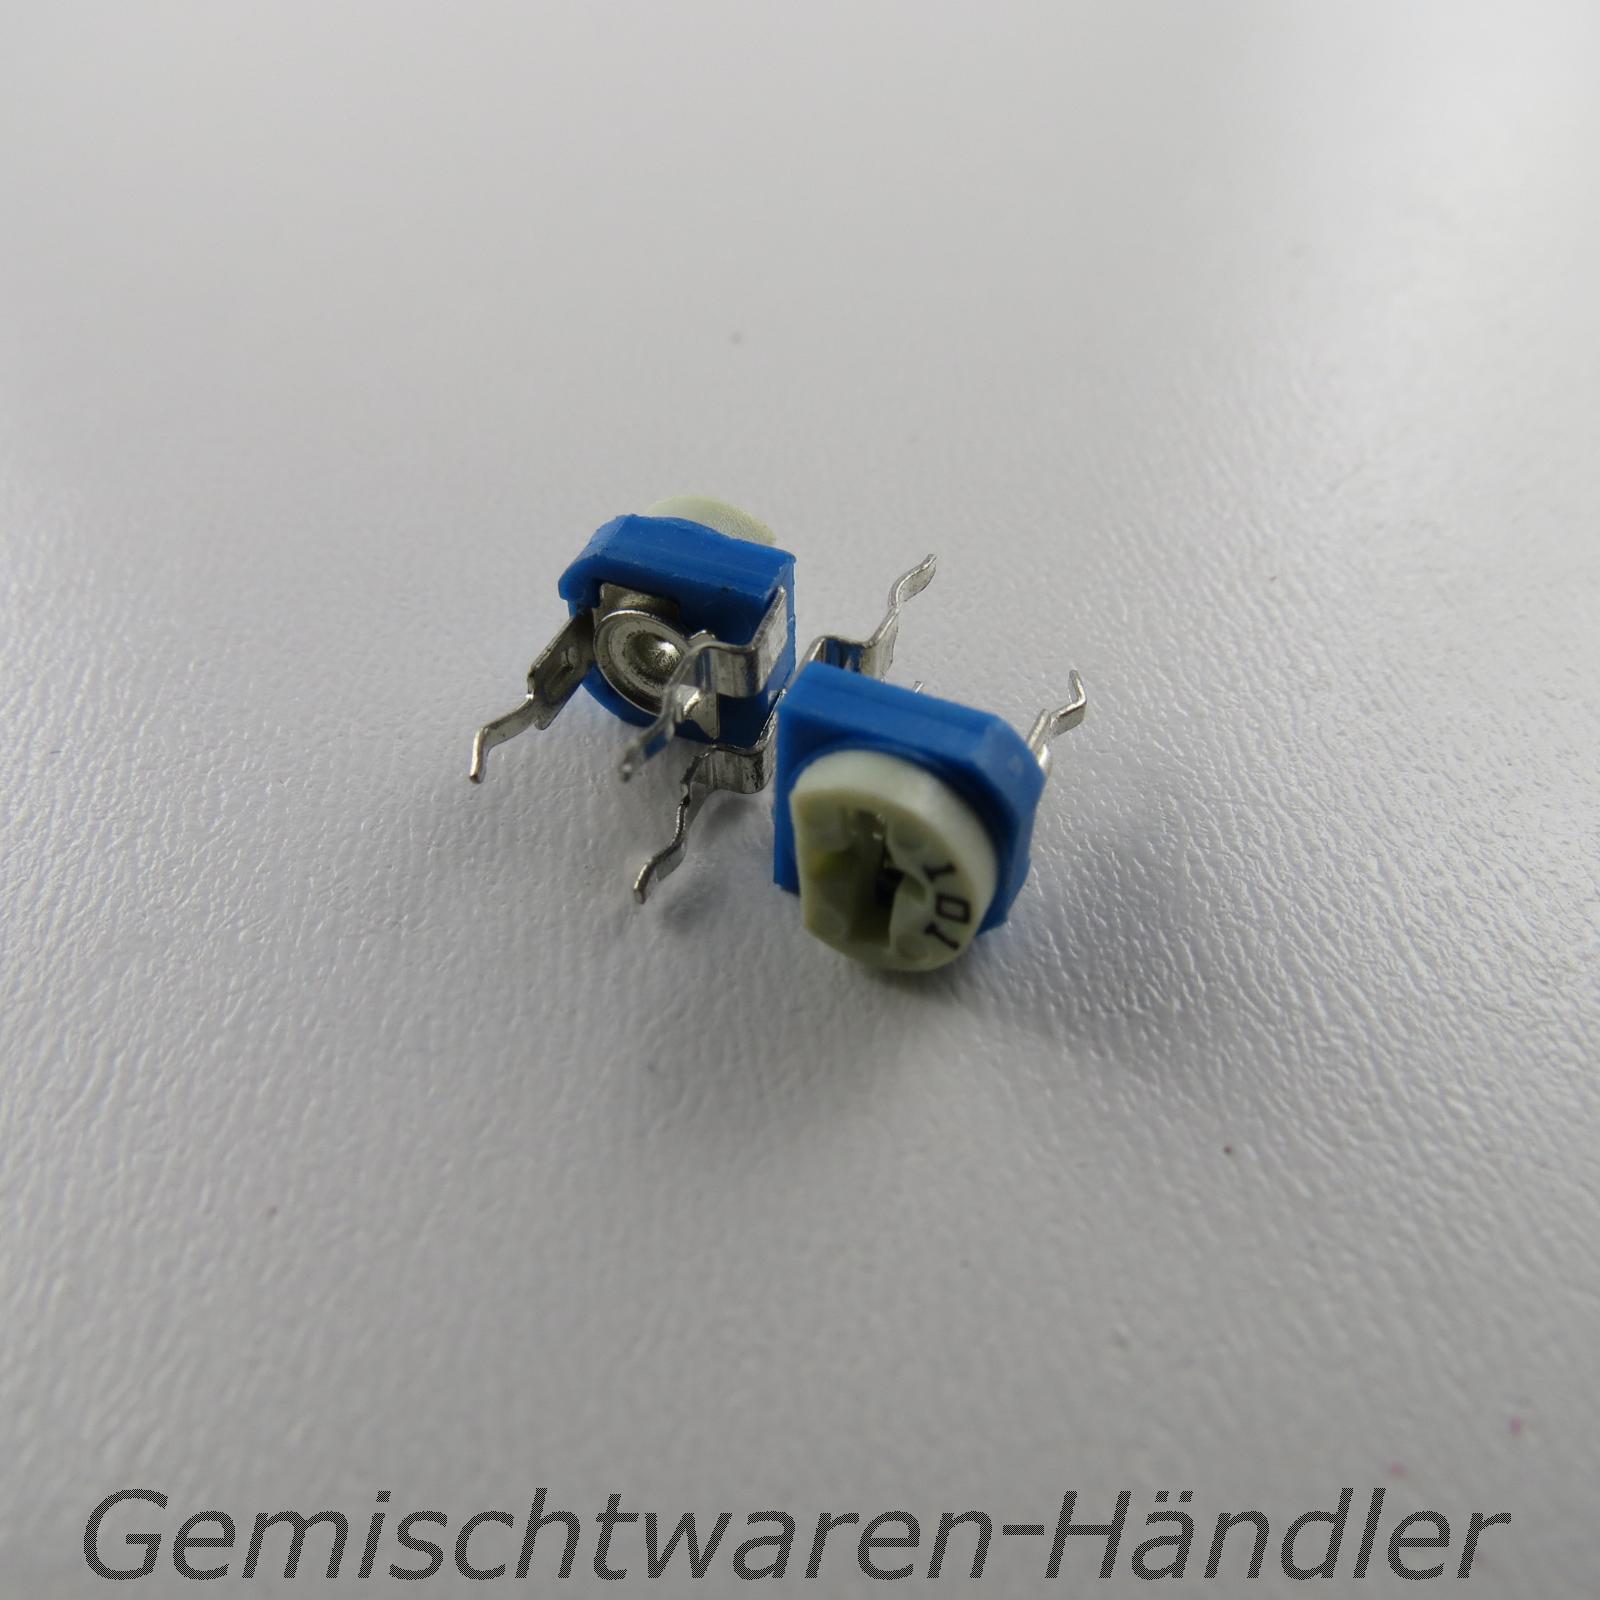 2x 300k Ohm Trimmer Potentiometer Trimmpoti Rotational Resistance Rotary Setting